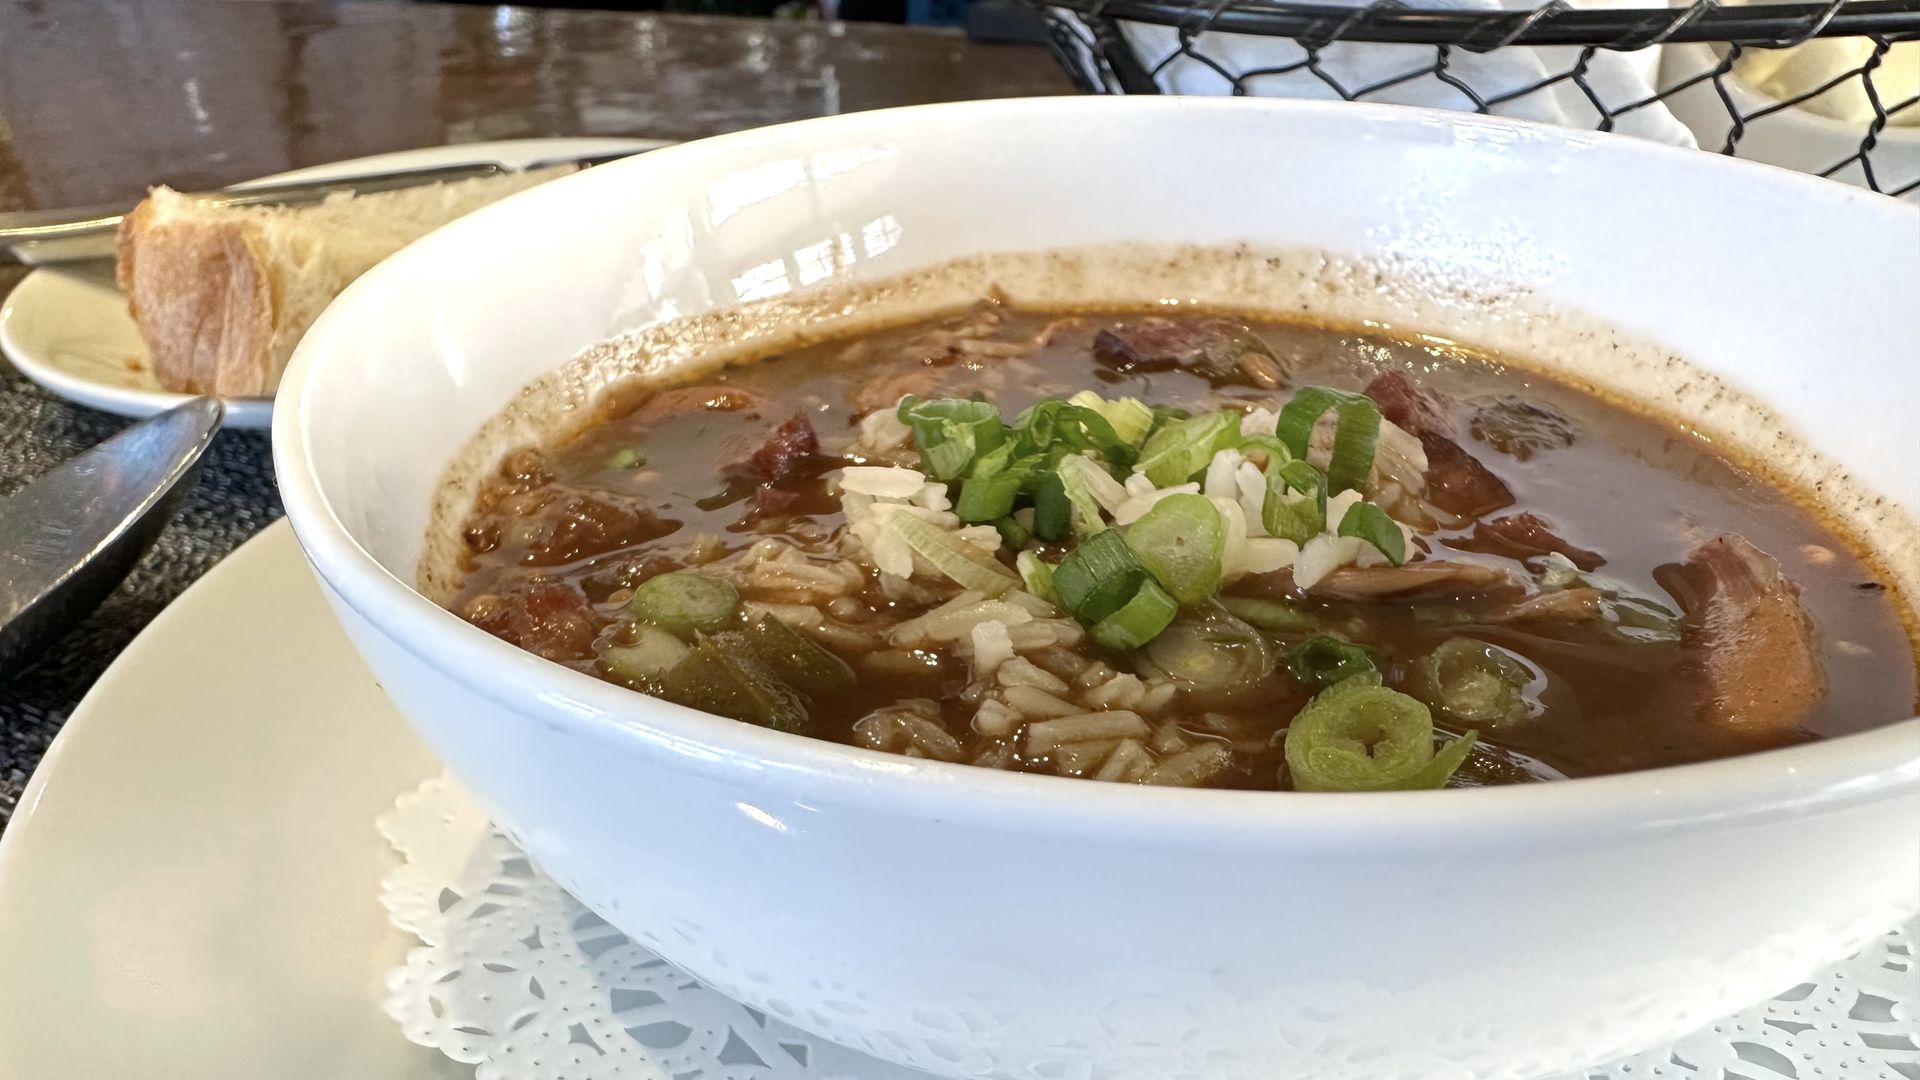 A white bowl is filled with a gumbo, with rice and green onions. The bowl sits on a charger with a doily, and a piece of bread is visible in the background.